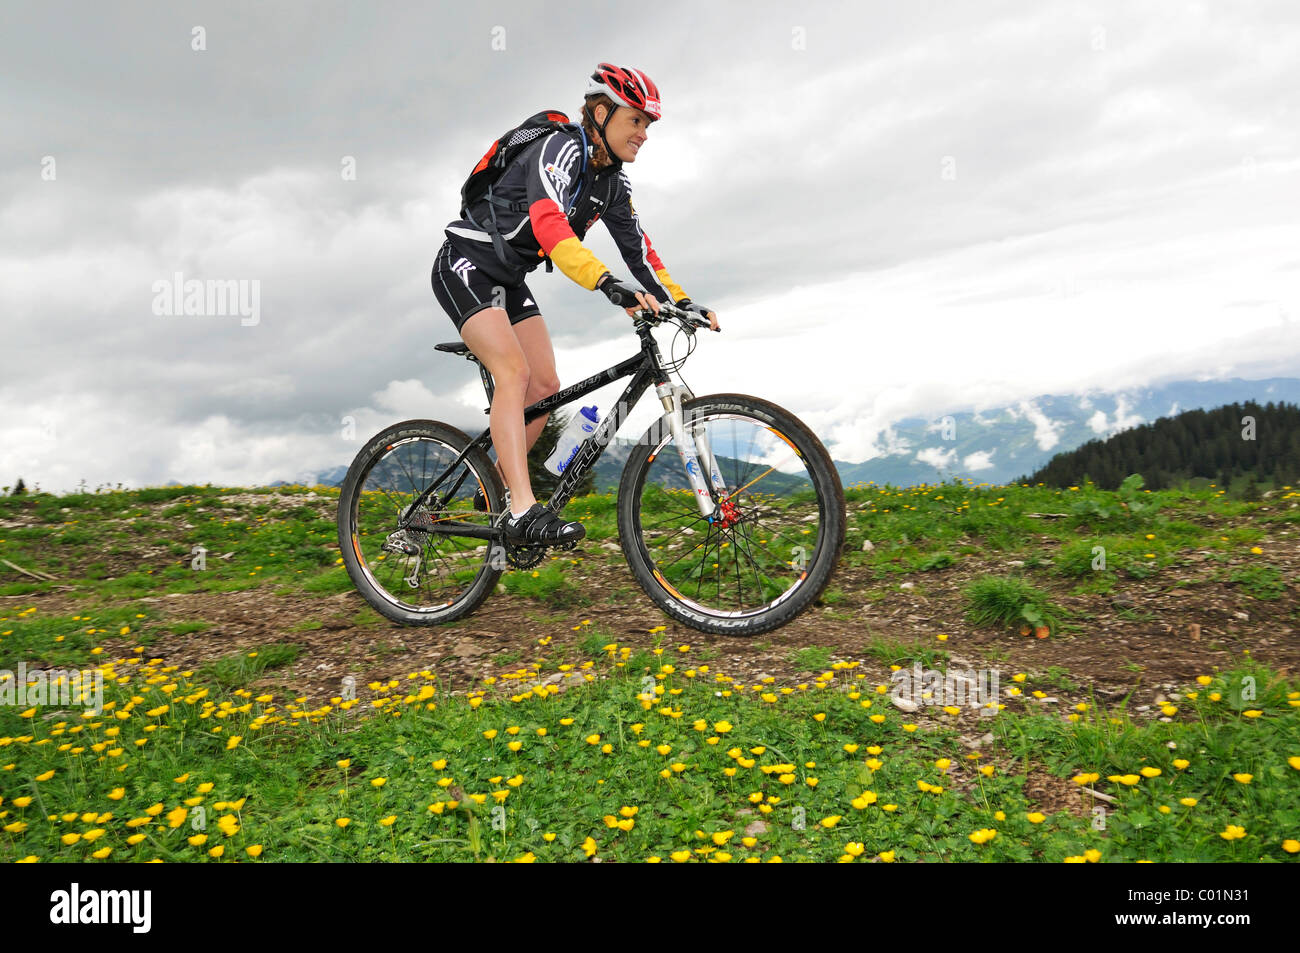 Evi Sachenbacher-Stehle, gold medalist from Vancouver, mountain bike training on the Eggenalm alpine pasture, Reit im Winkl Stock Photo